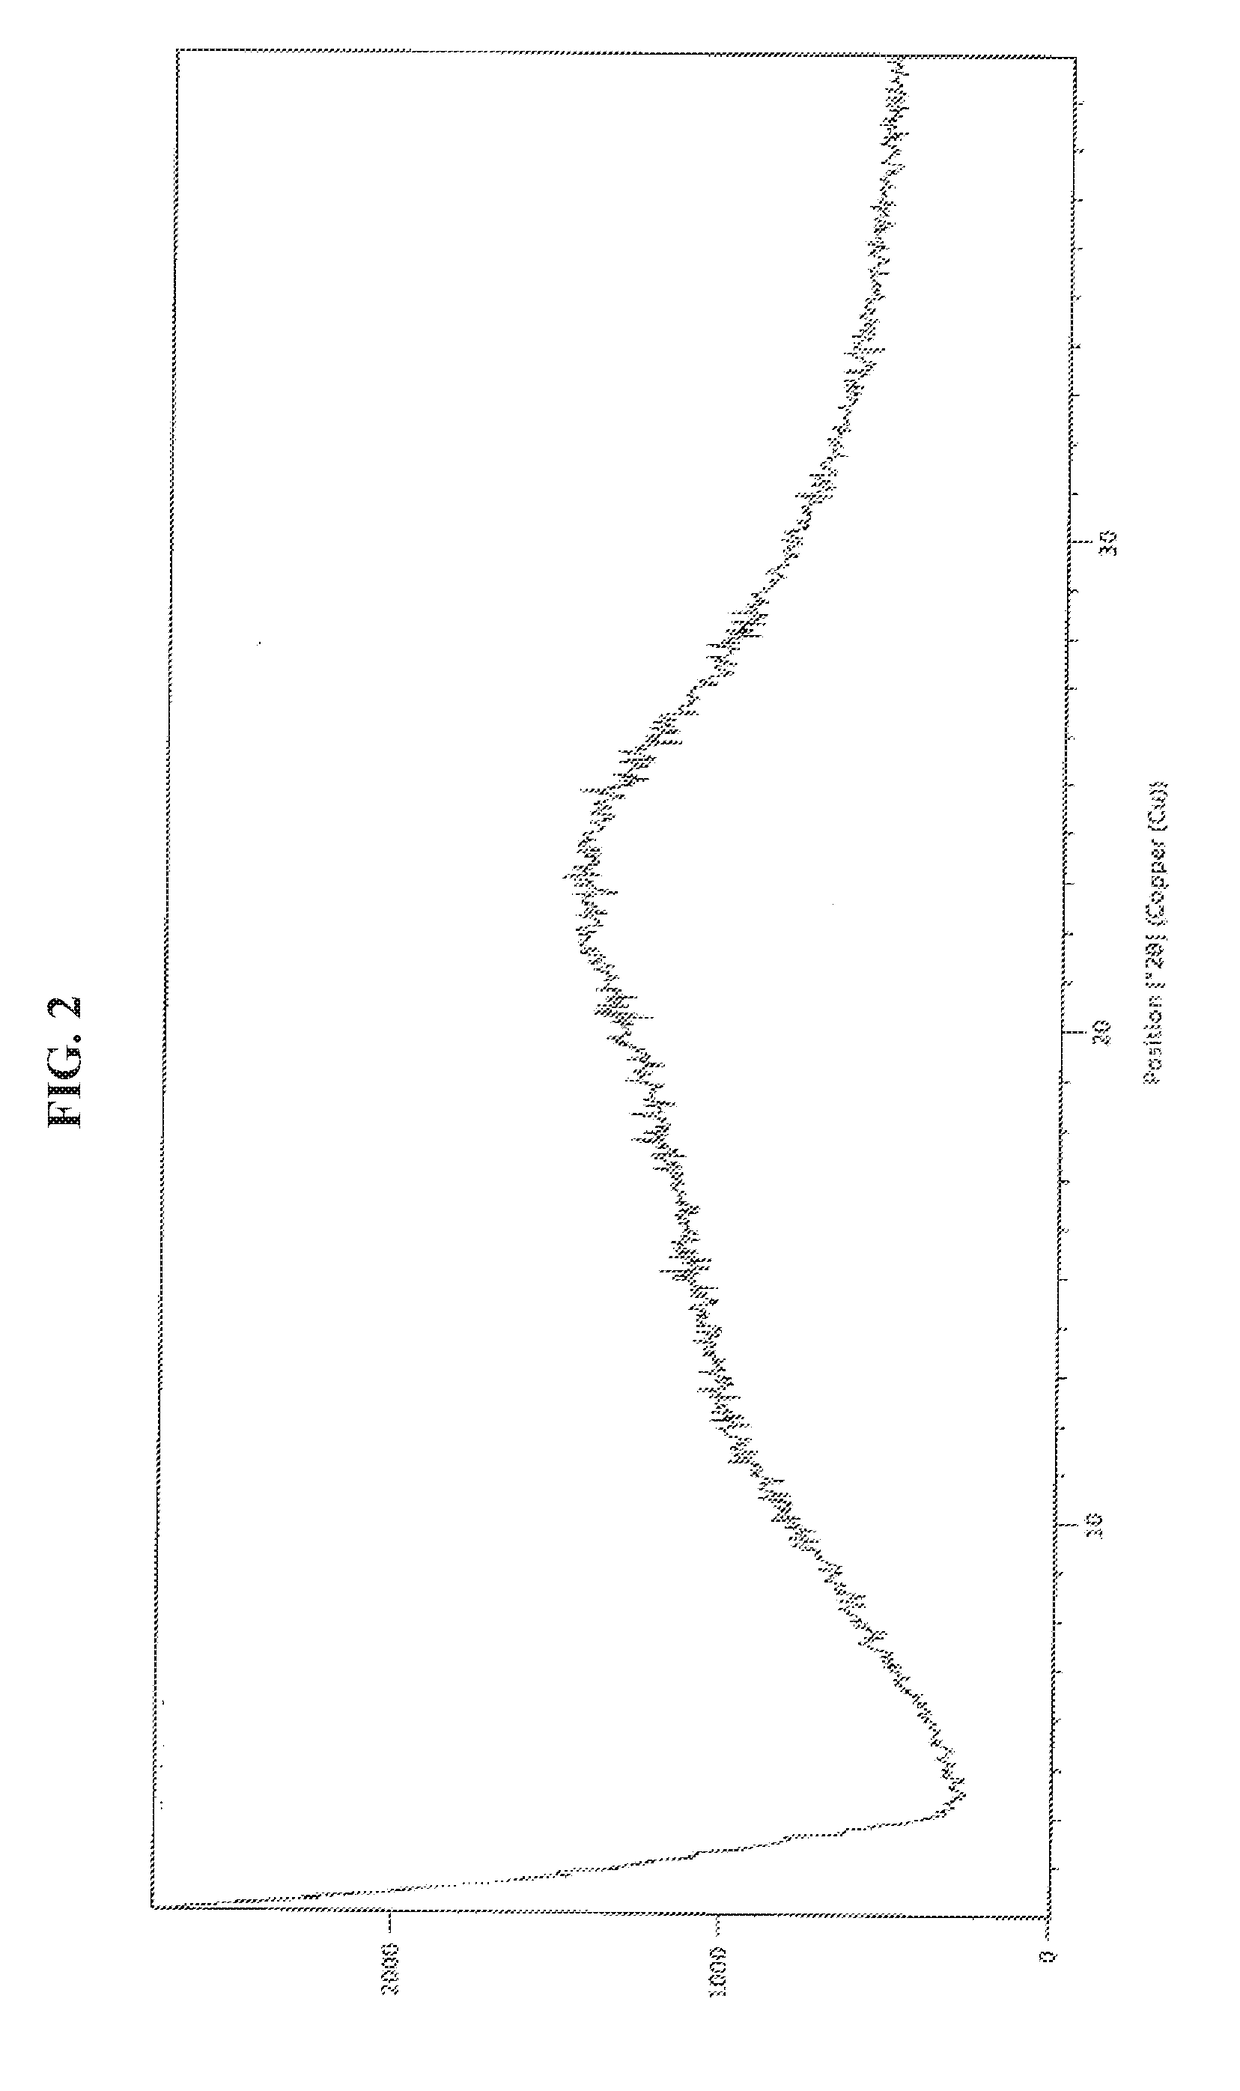 Amorphous form of daclatasvir and its salts and process for preparation thereof